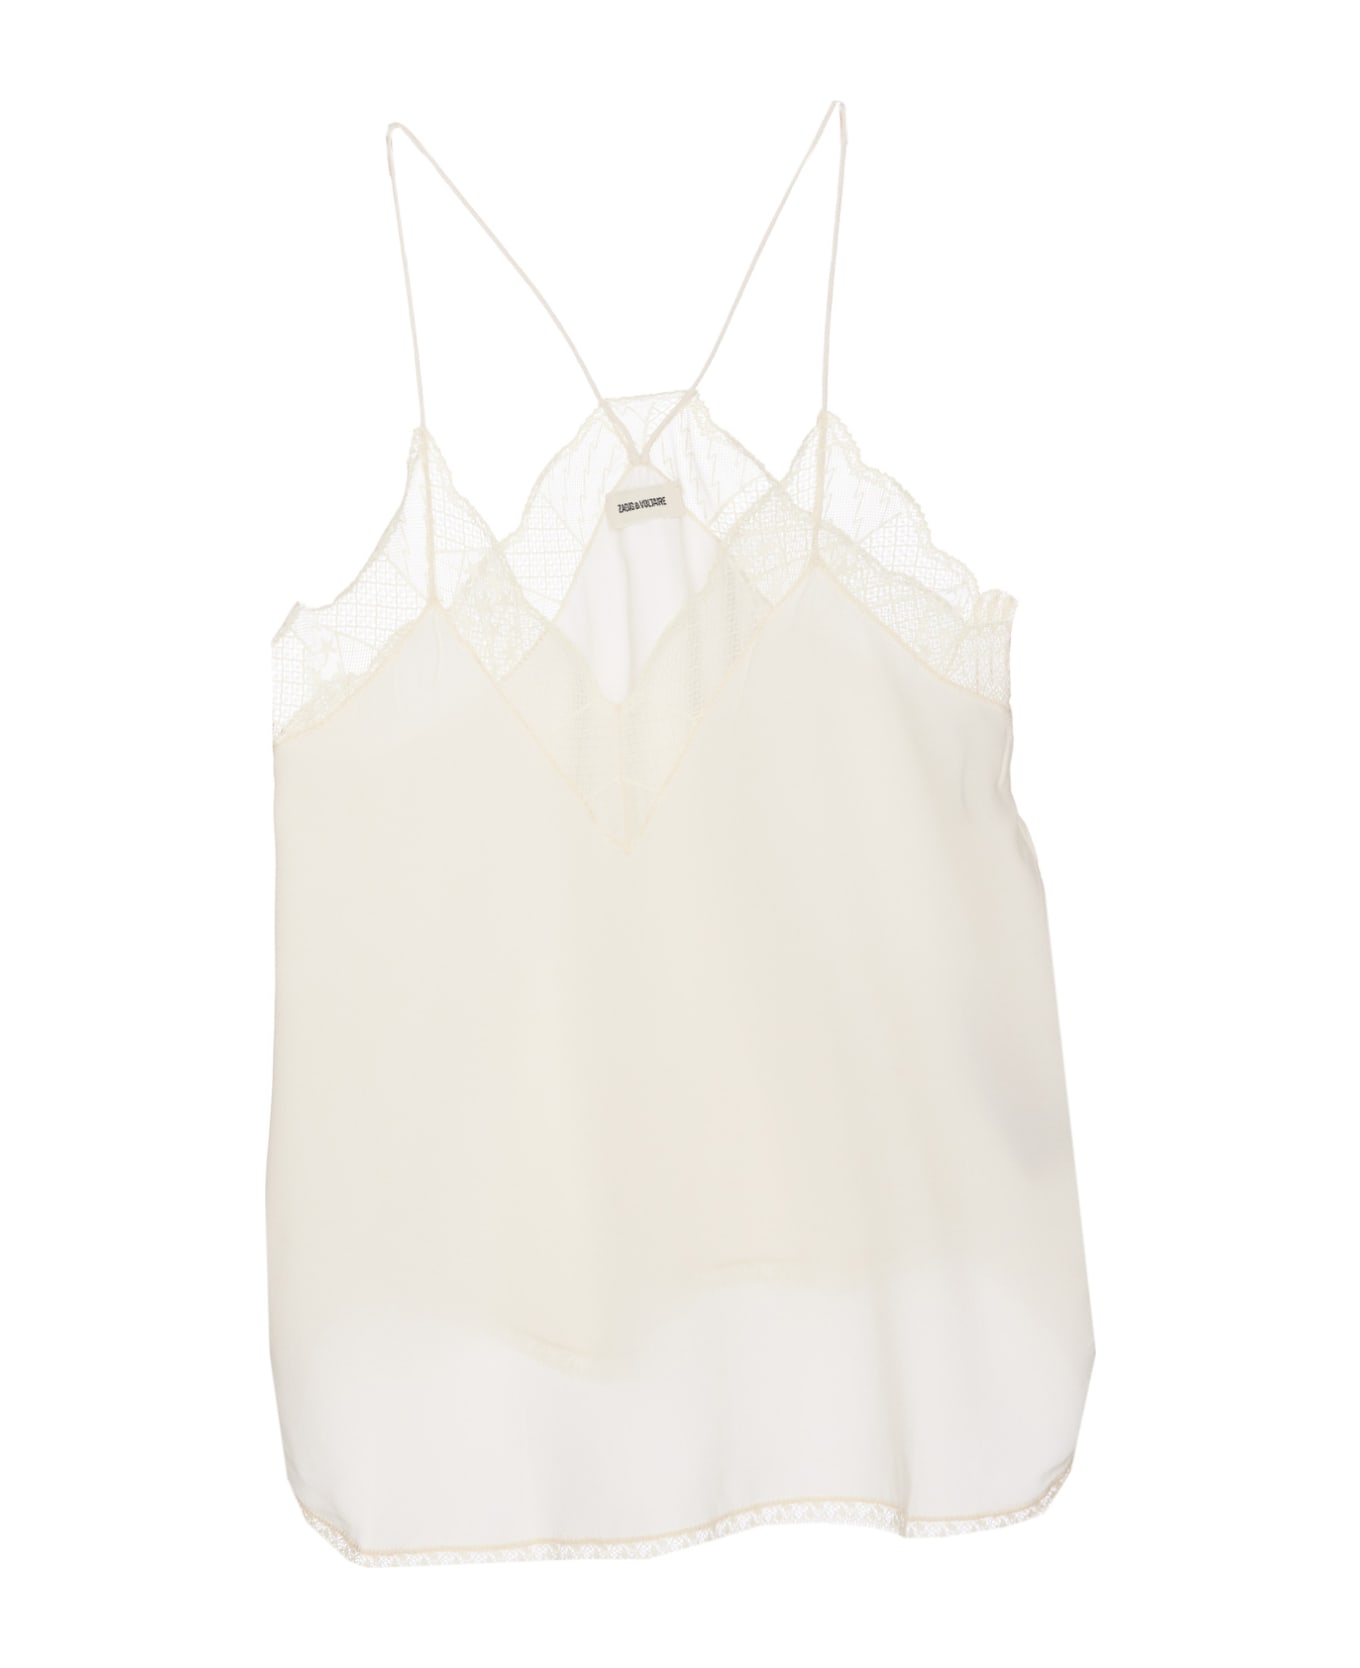 Zadig & Voltaire Christy Cdc Top - White キャミソール